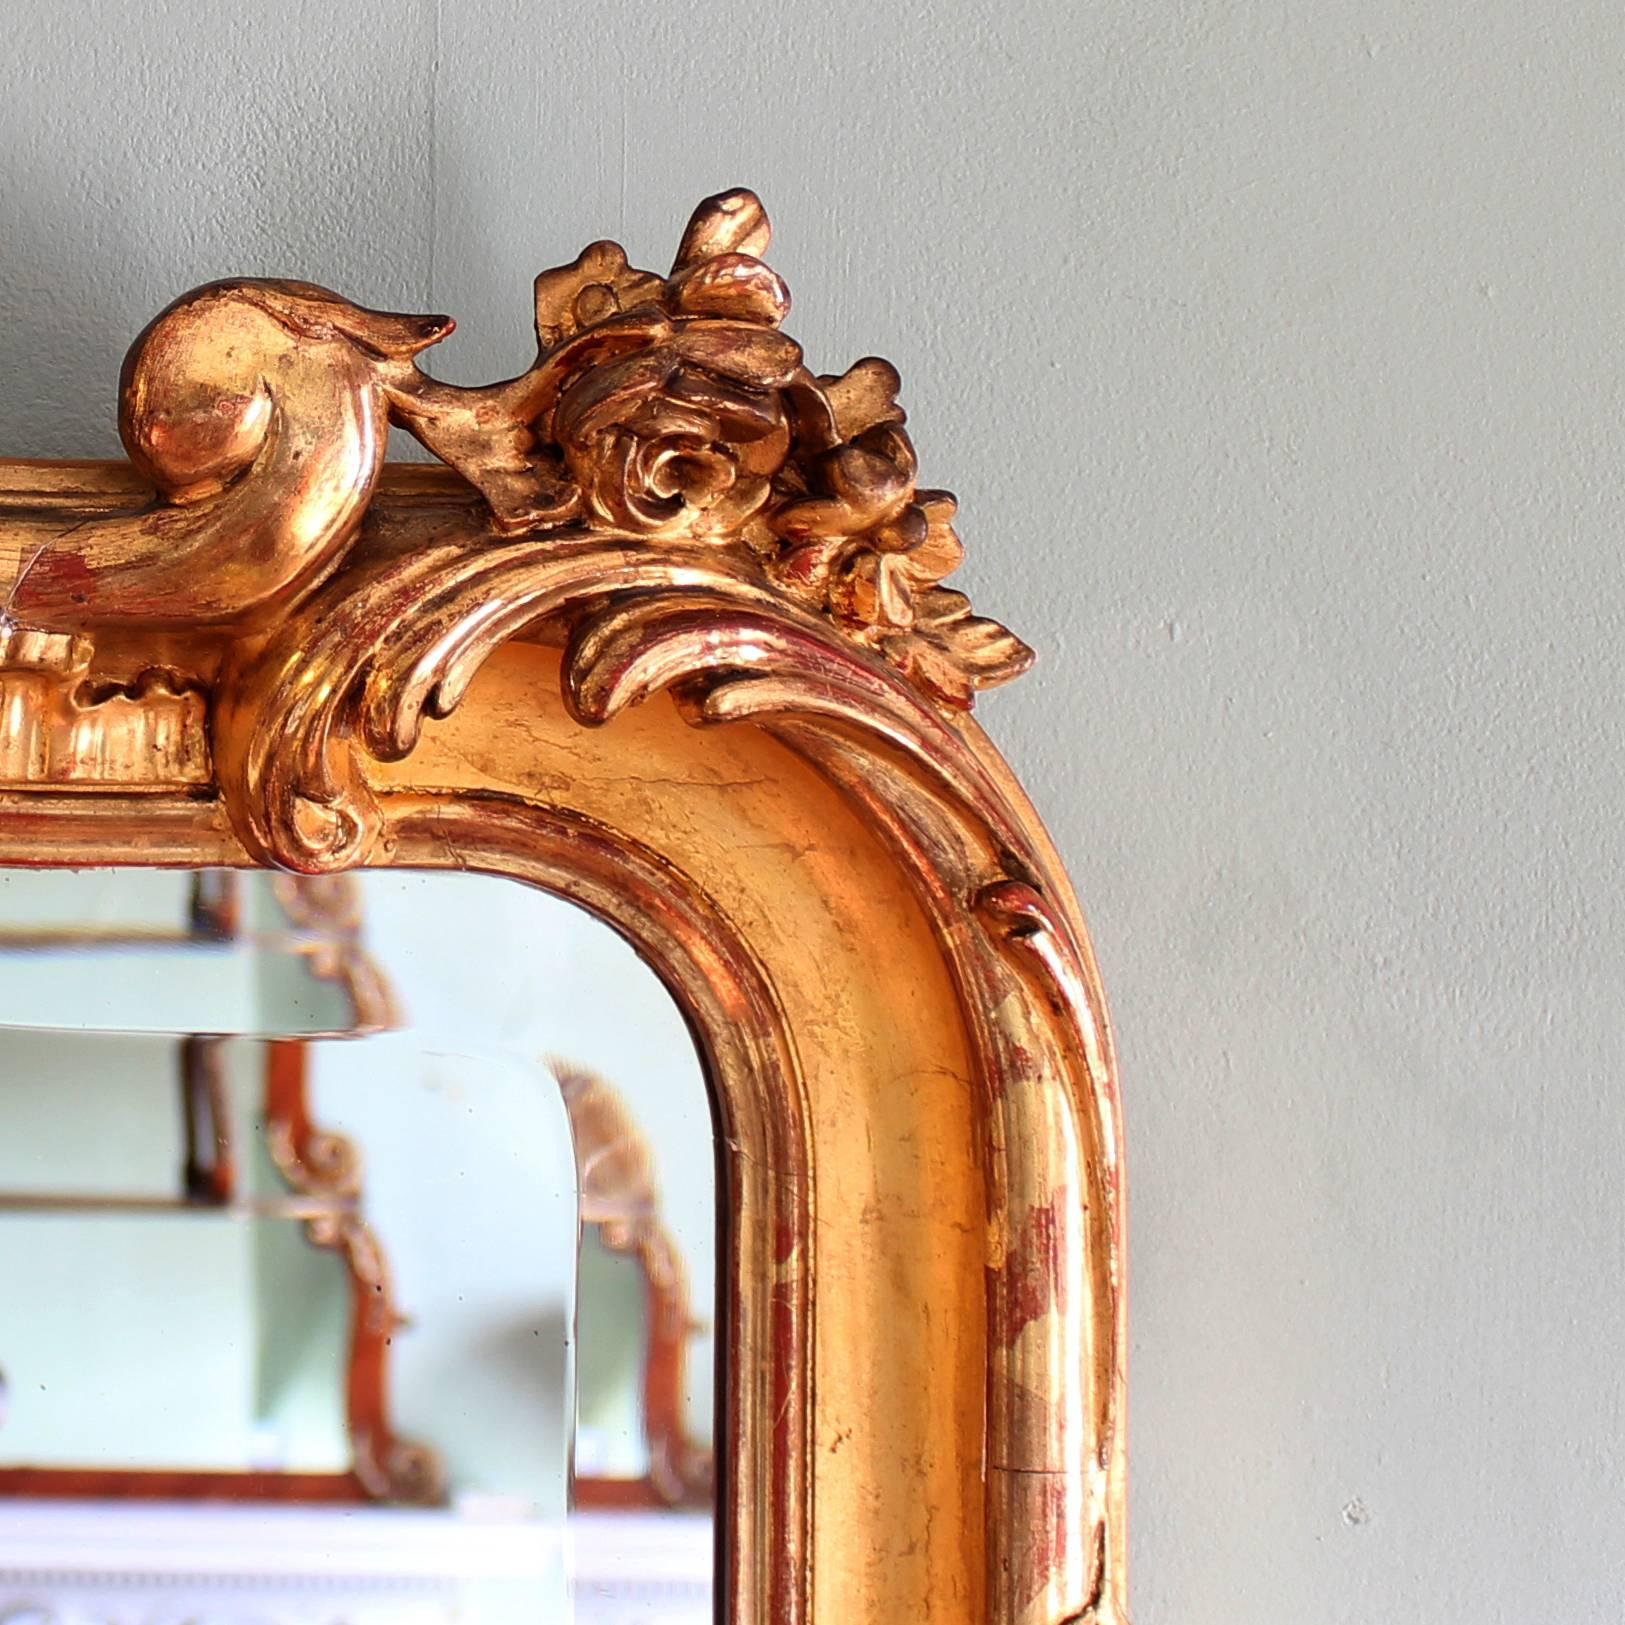 A nineteenth century French giltwood mirror, the shaped and bevelled plate surrounded by frame decorated with foliage and scrolls in the Rococo taste.

Available to view at Brunswick House.

Dimensions:
155.5 cm high x 103 cm wide x 13.5 cm deep